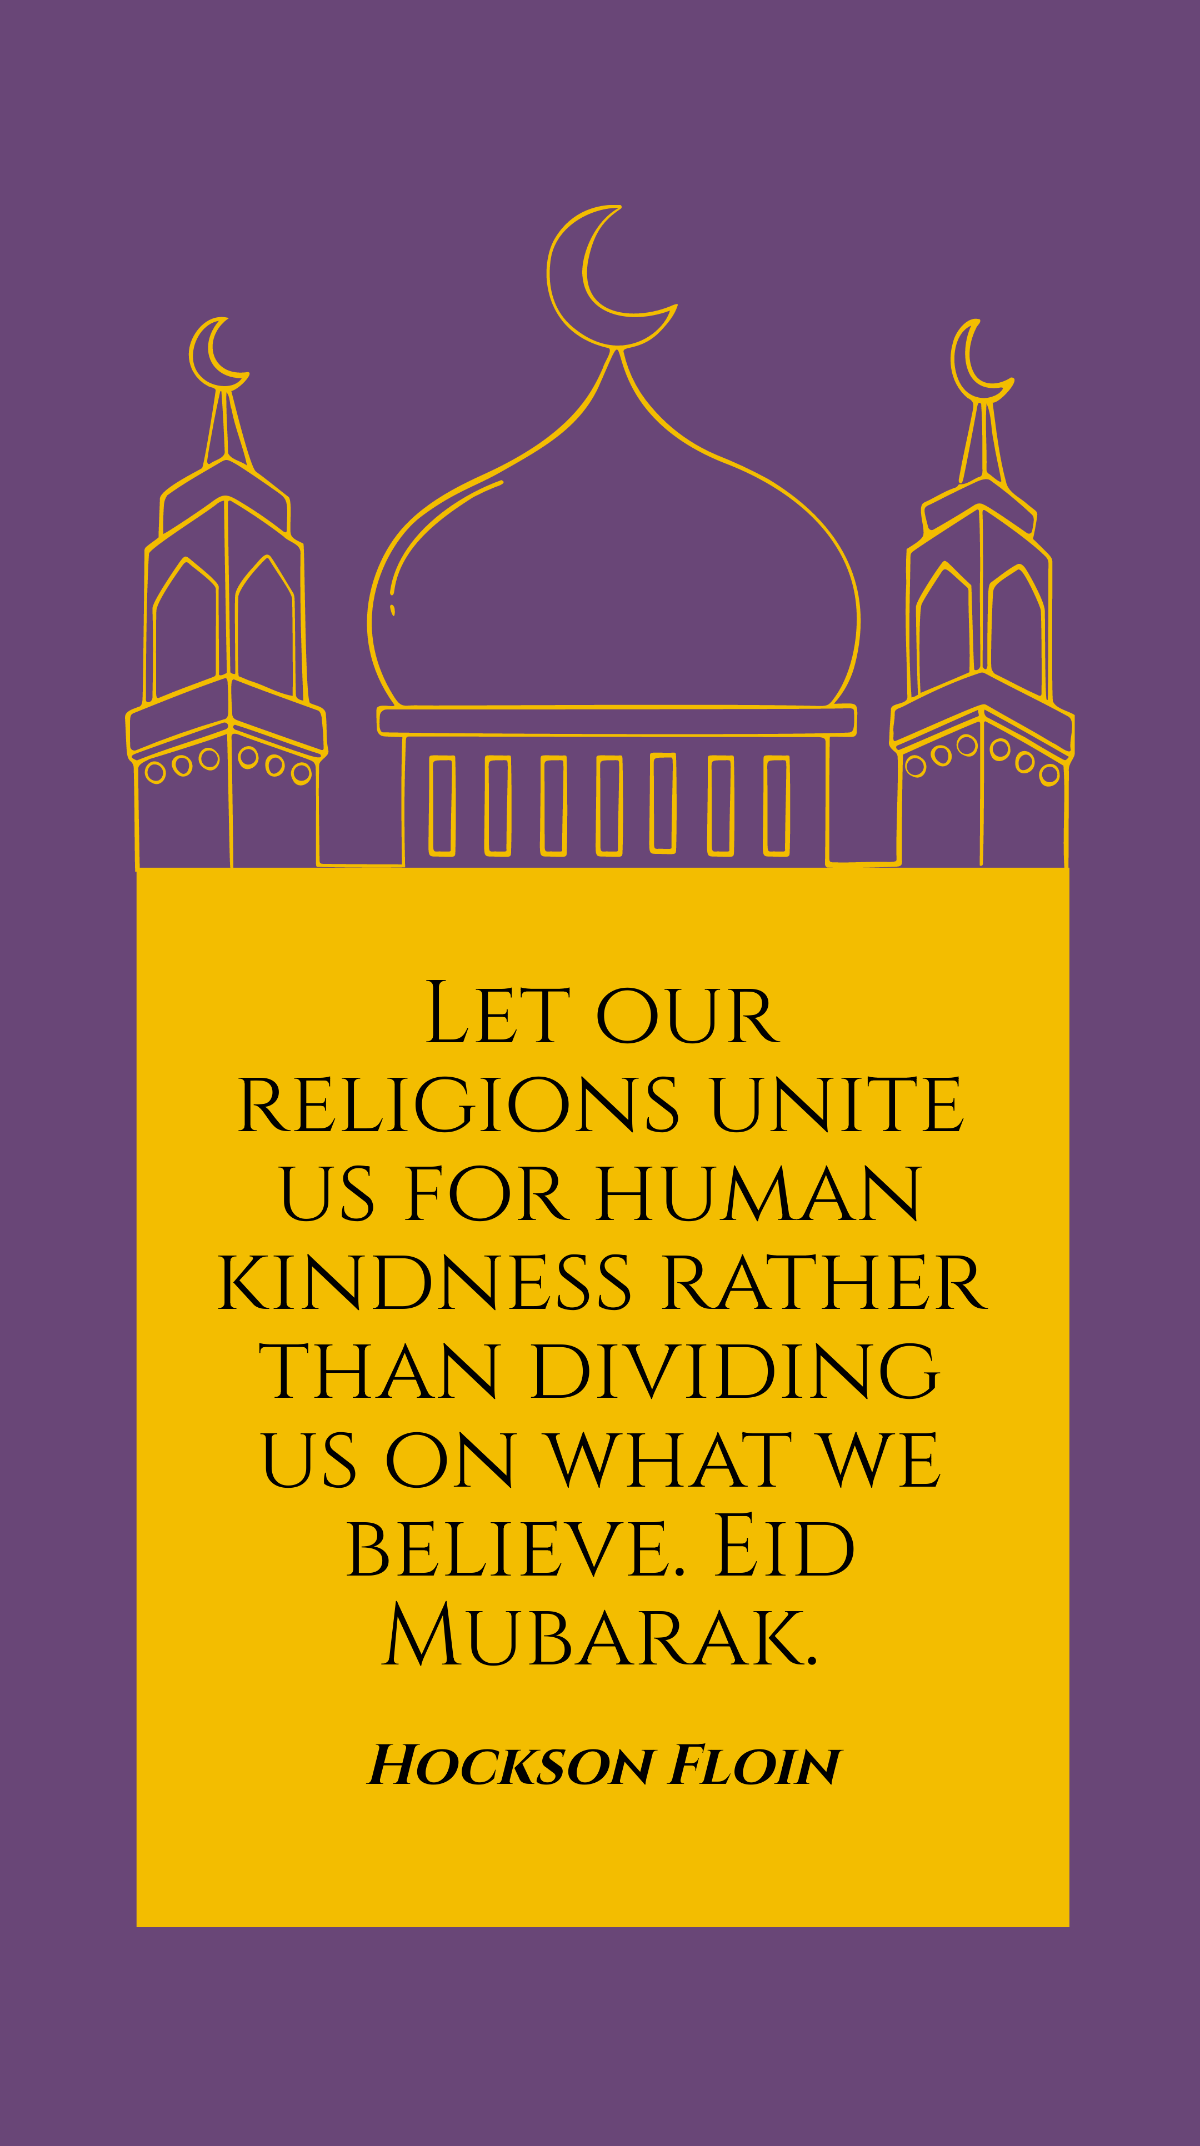 Hockson Floin - Let our religions unite us for human kindness rather than dividing us on what we believe. Eid Mubarak. Template